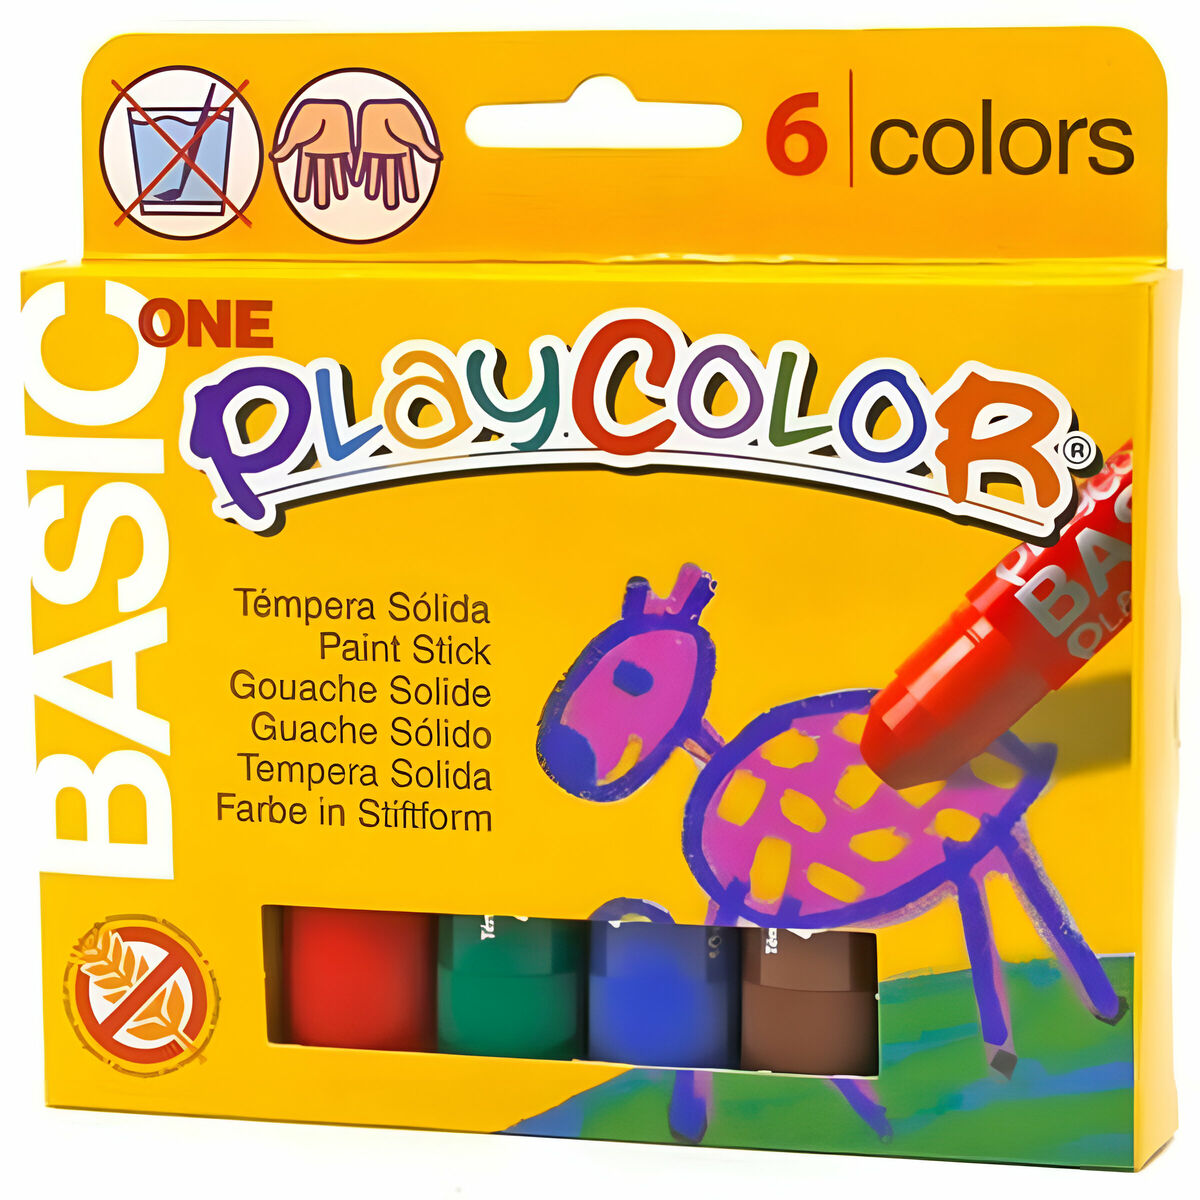 Solid tempera Playcolor Basic One Multicolour (24 Units)